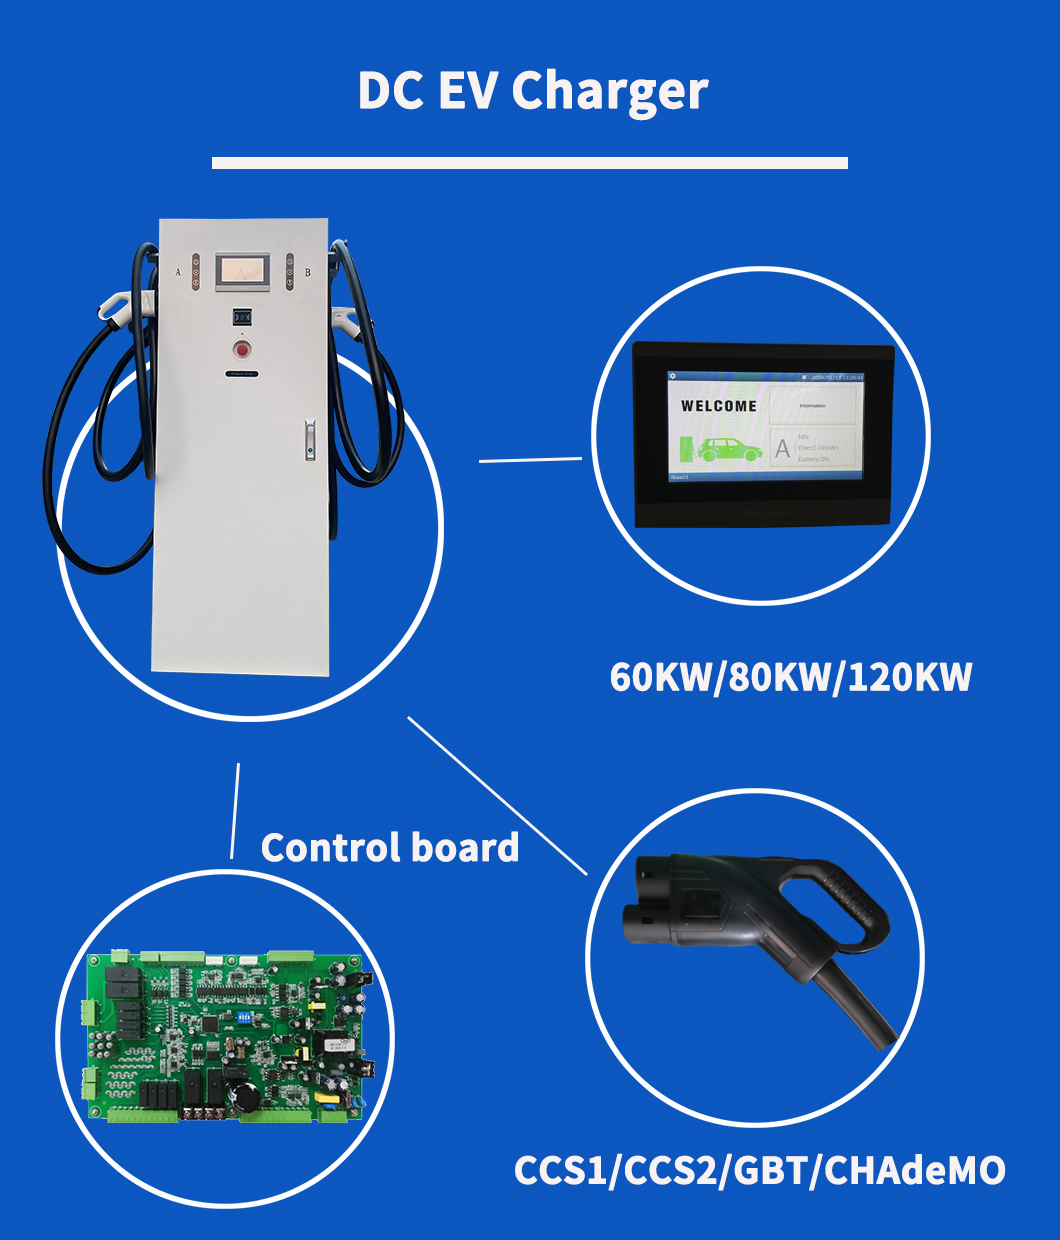 DC Electric Vehicle Chargers